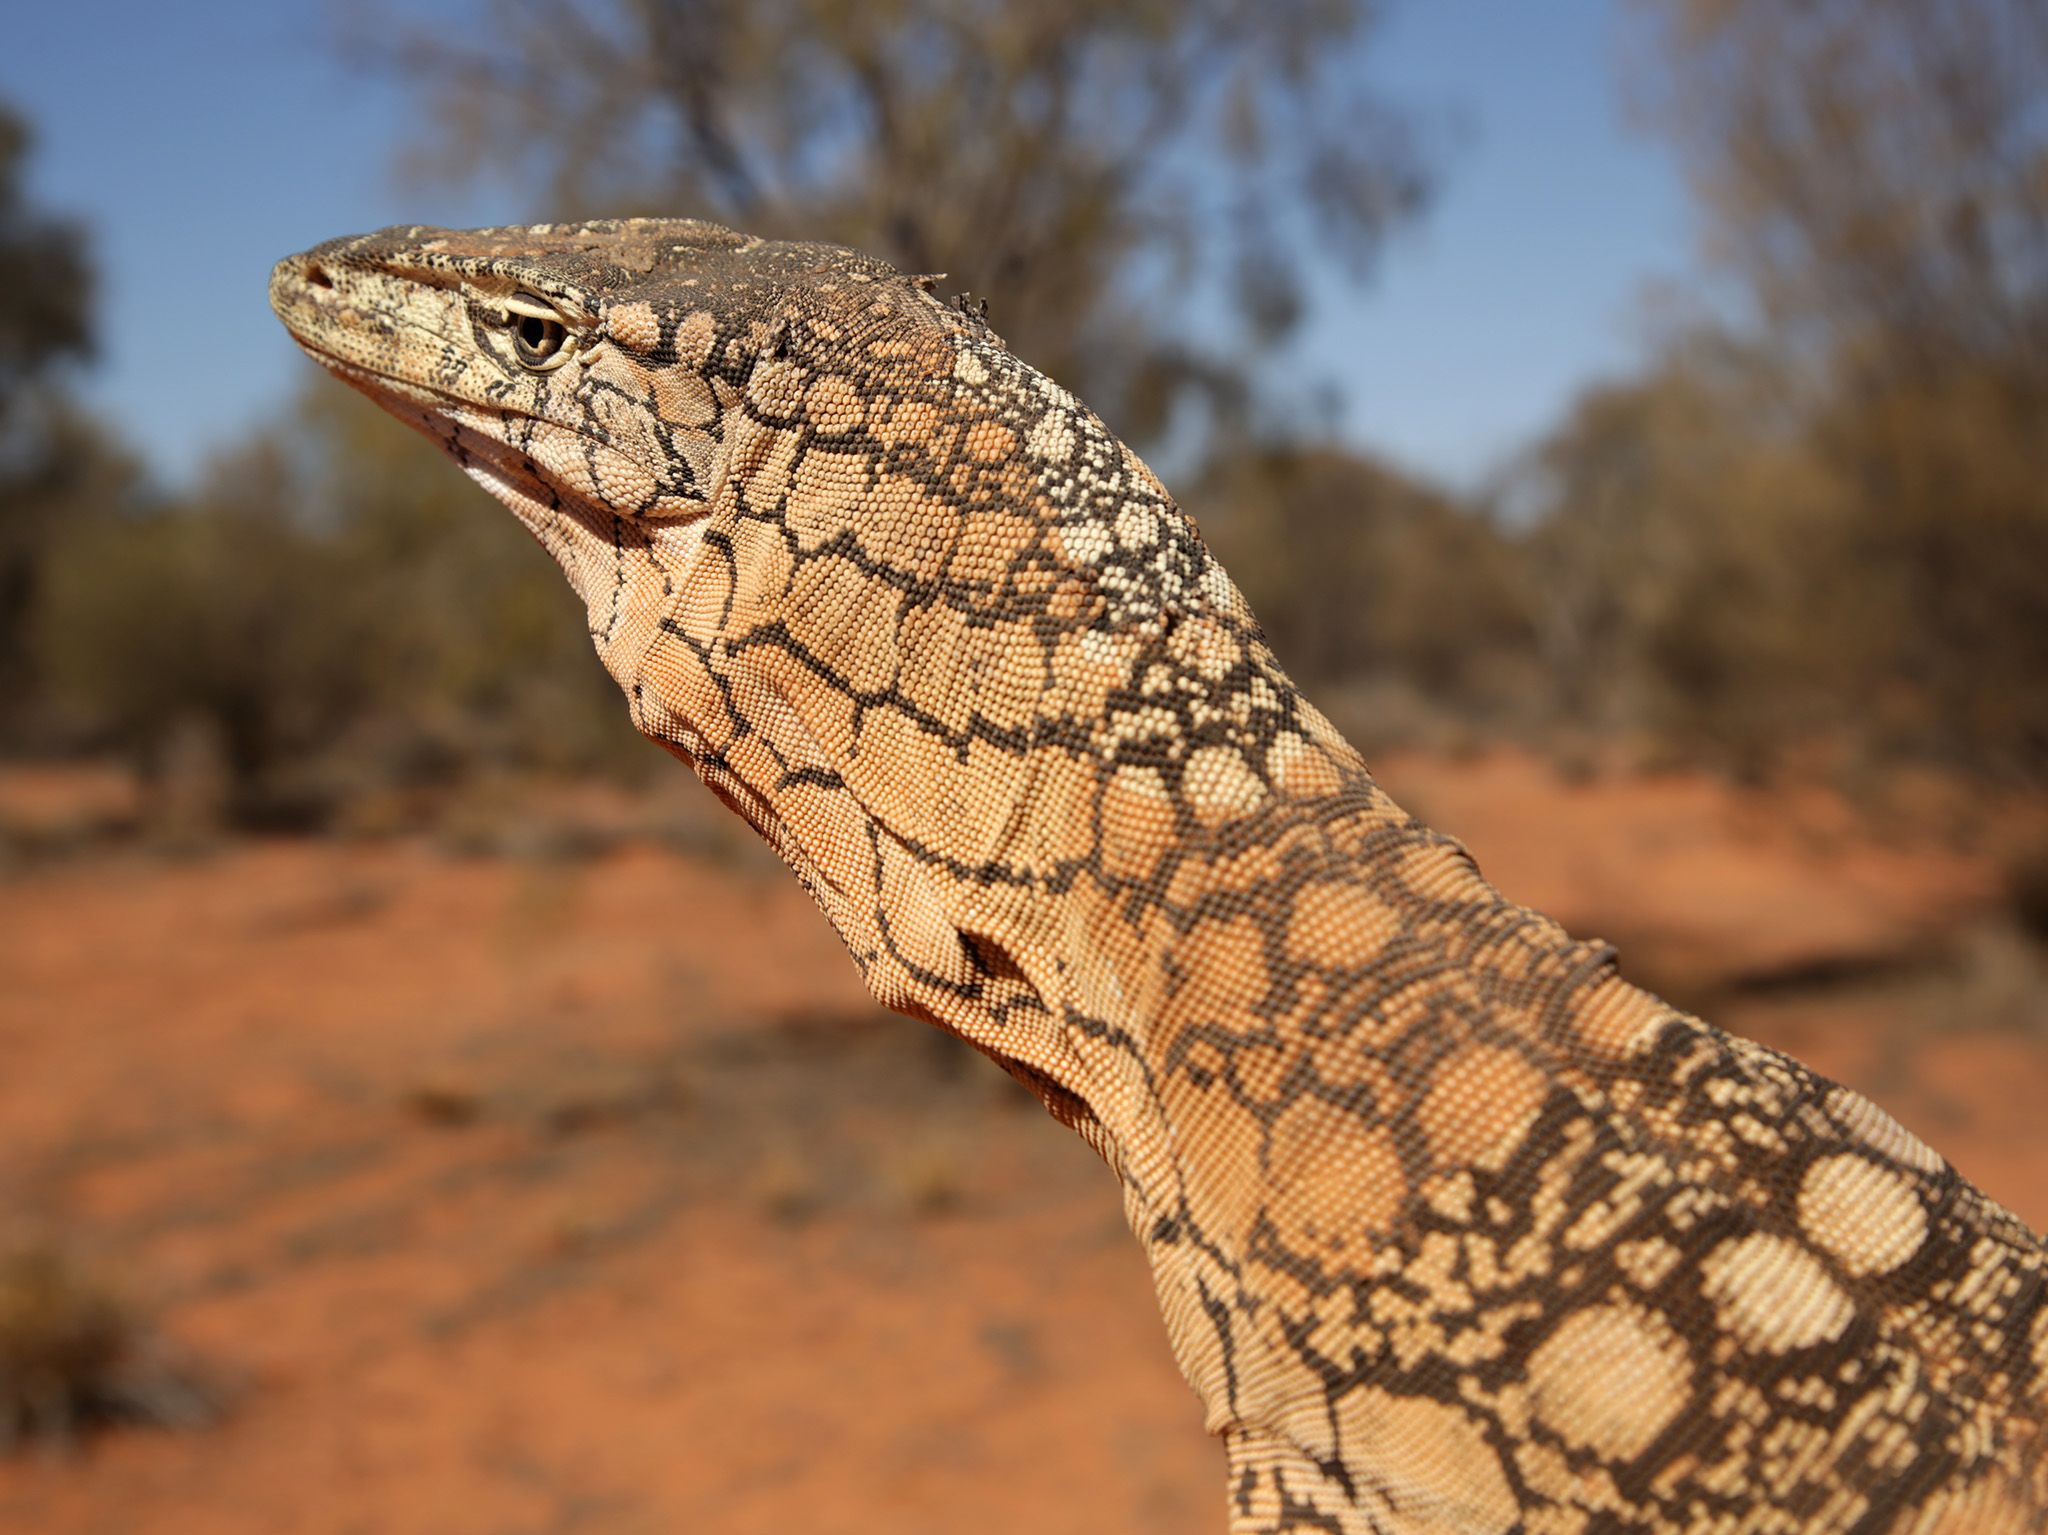 Northern Territory, Australia:  Australia's largest lizard, the perentie goanna, stands poised... [Photo of the day - August 2019]